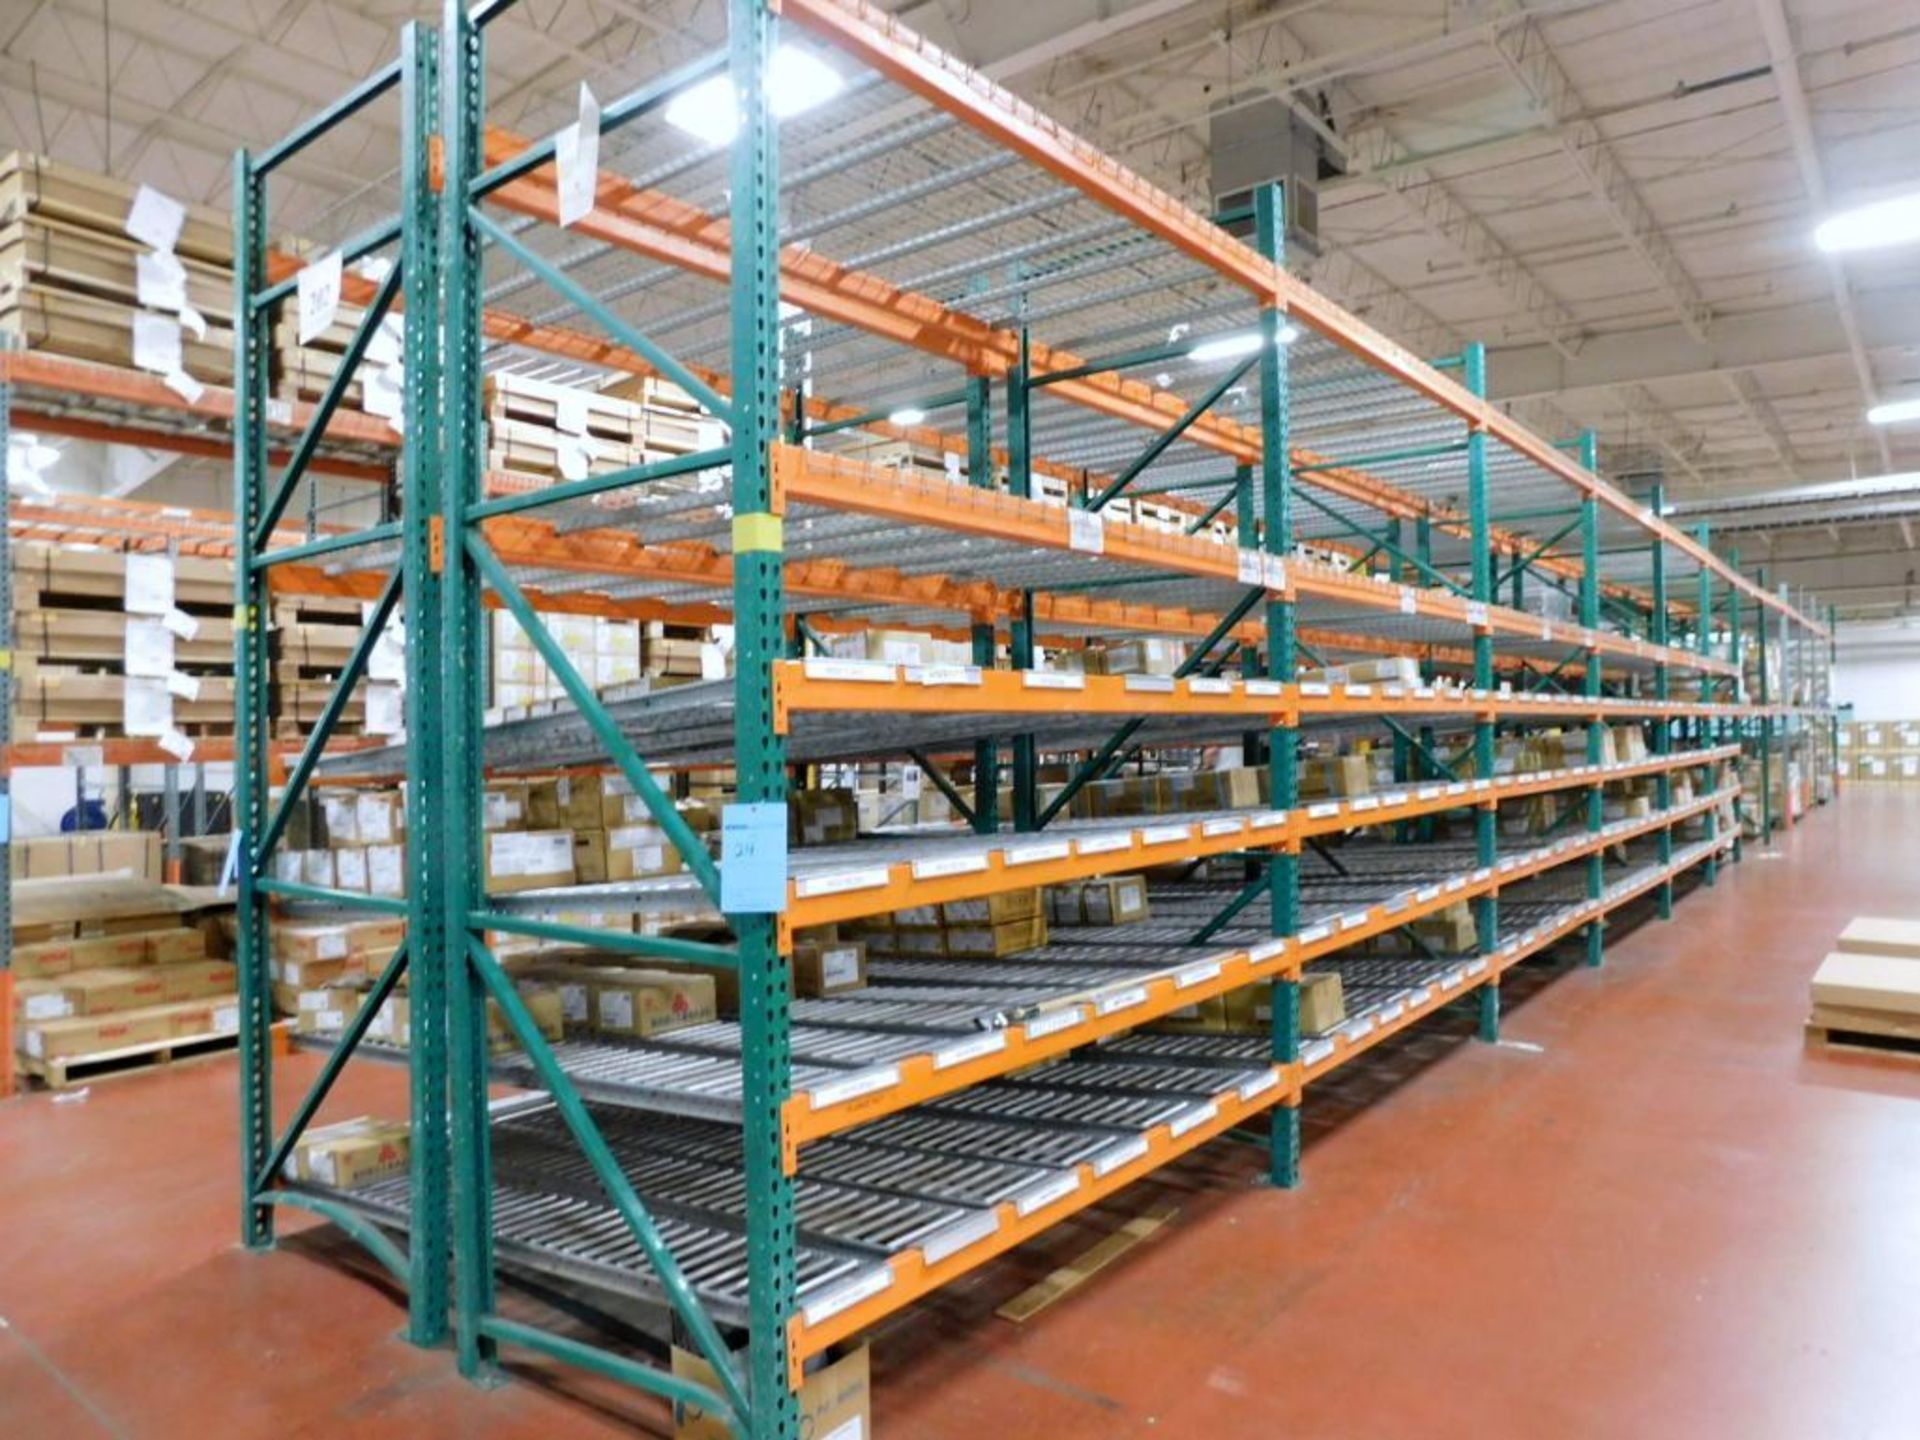 (20) Sections of Pallet Racking, Approximate 8' x 4' x 12'., and (2) Sections Approximate 12' x 4' x